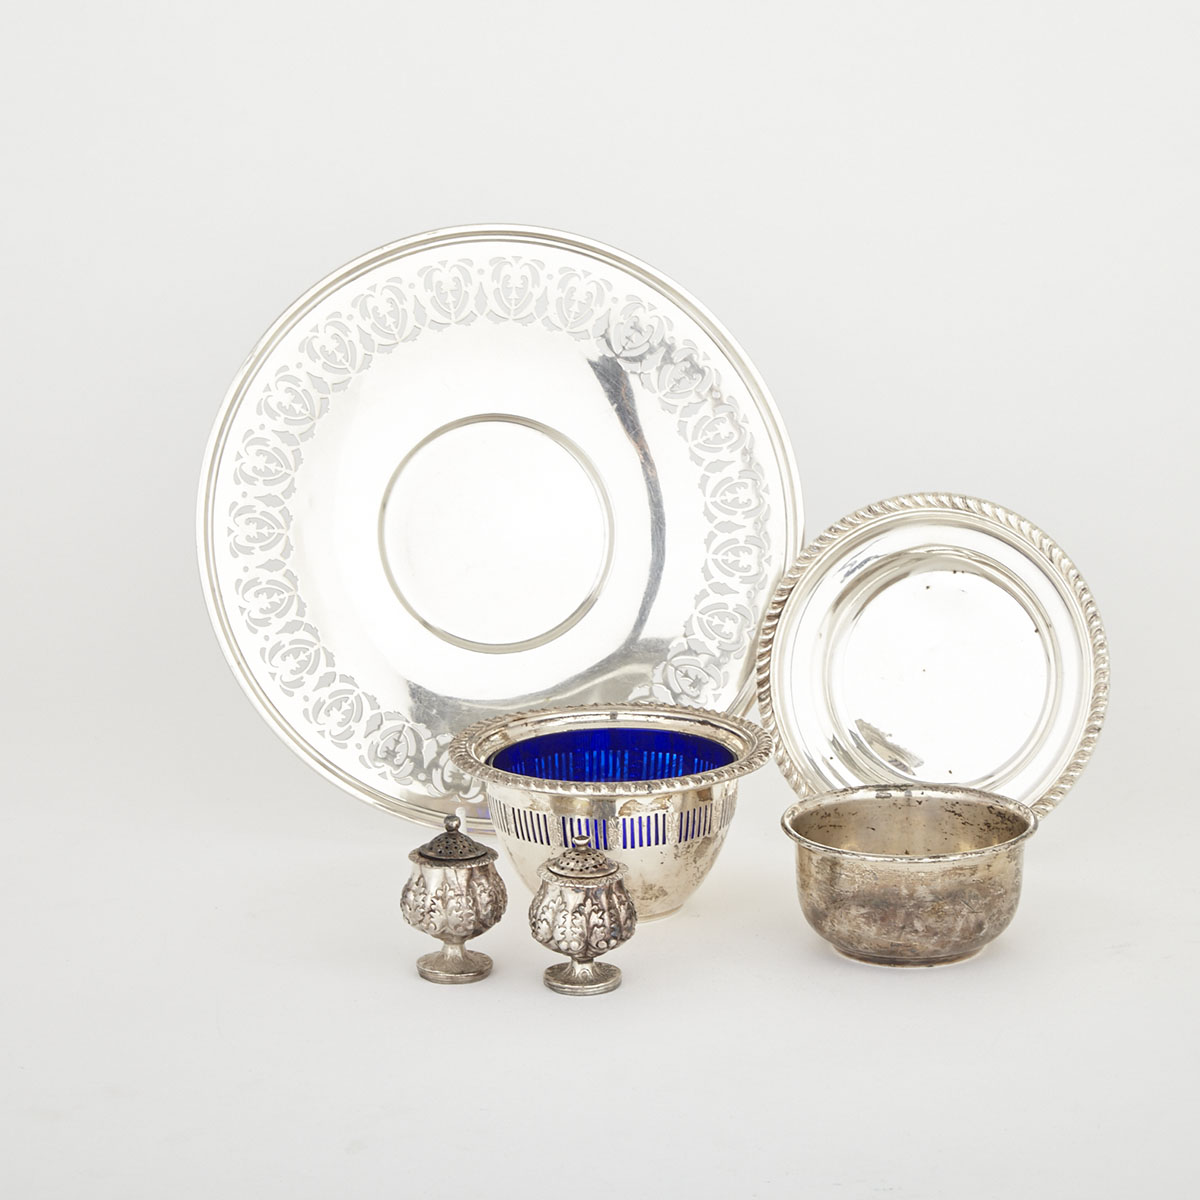 Pair of Indian Silver Pepper Casters, c.1900 and Canadian Silver Small Dish, Plate and Two Bowls, Henry Birks & Sons, Montreal, Que., 20th century